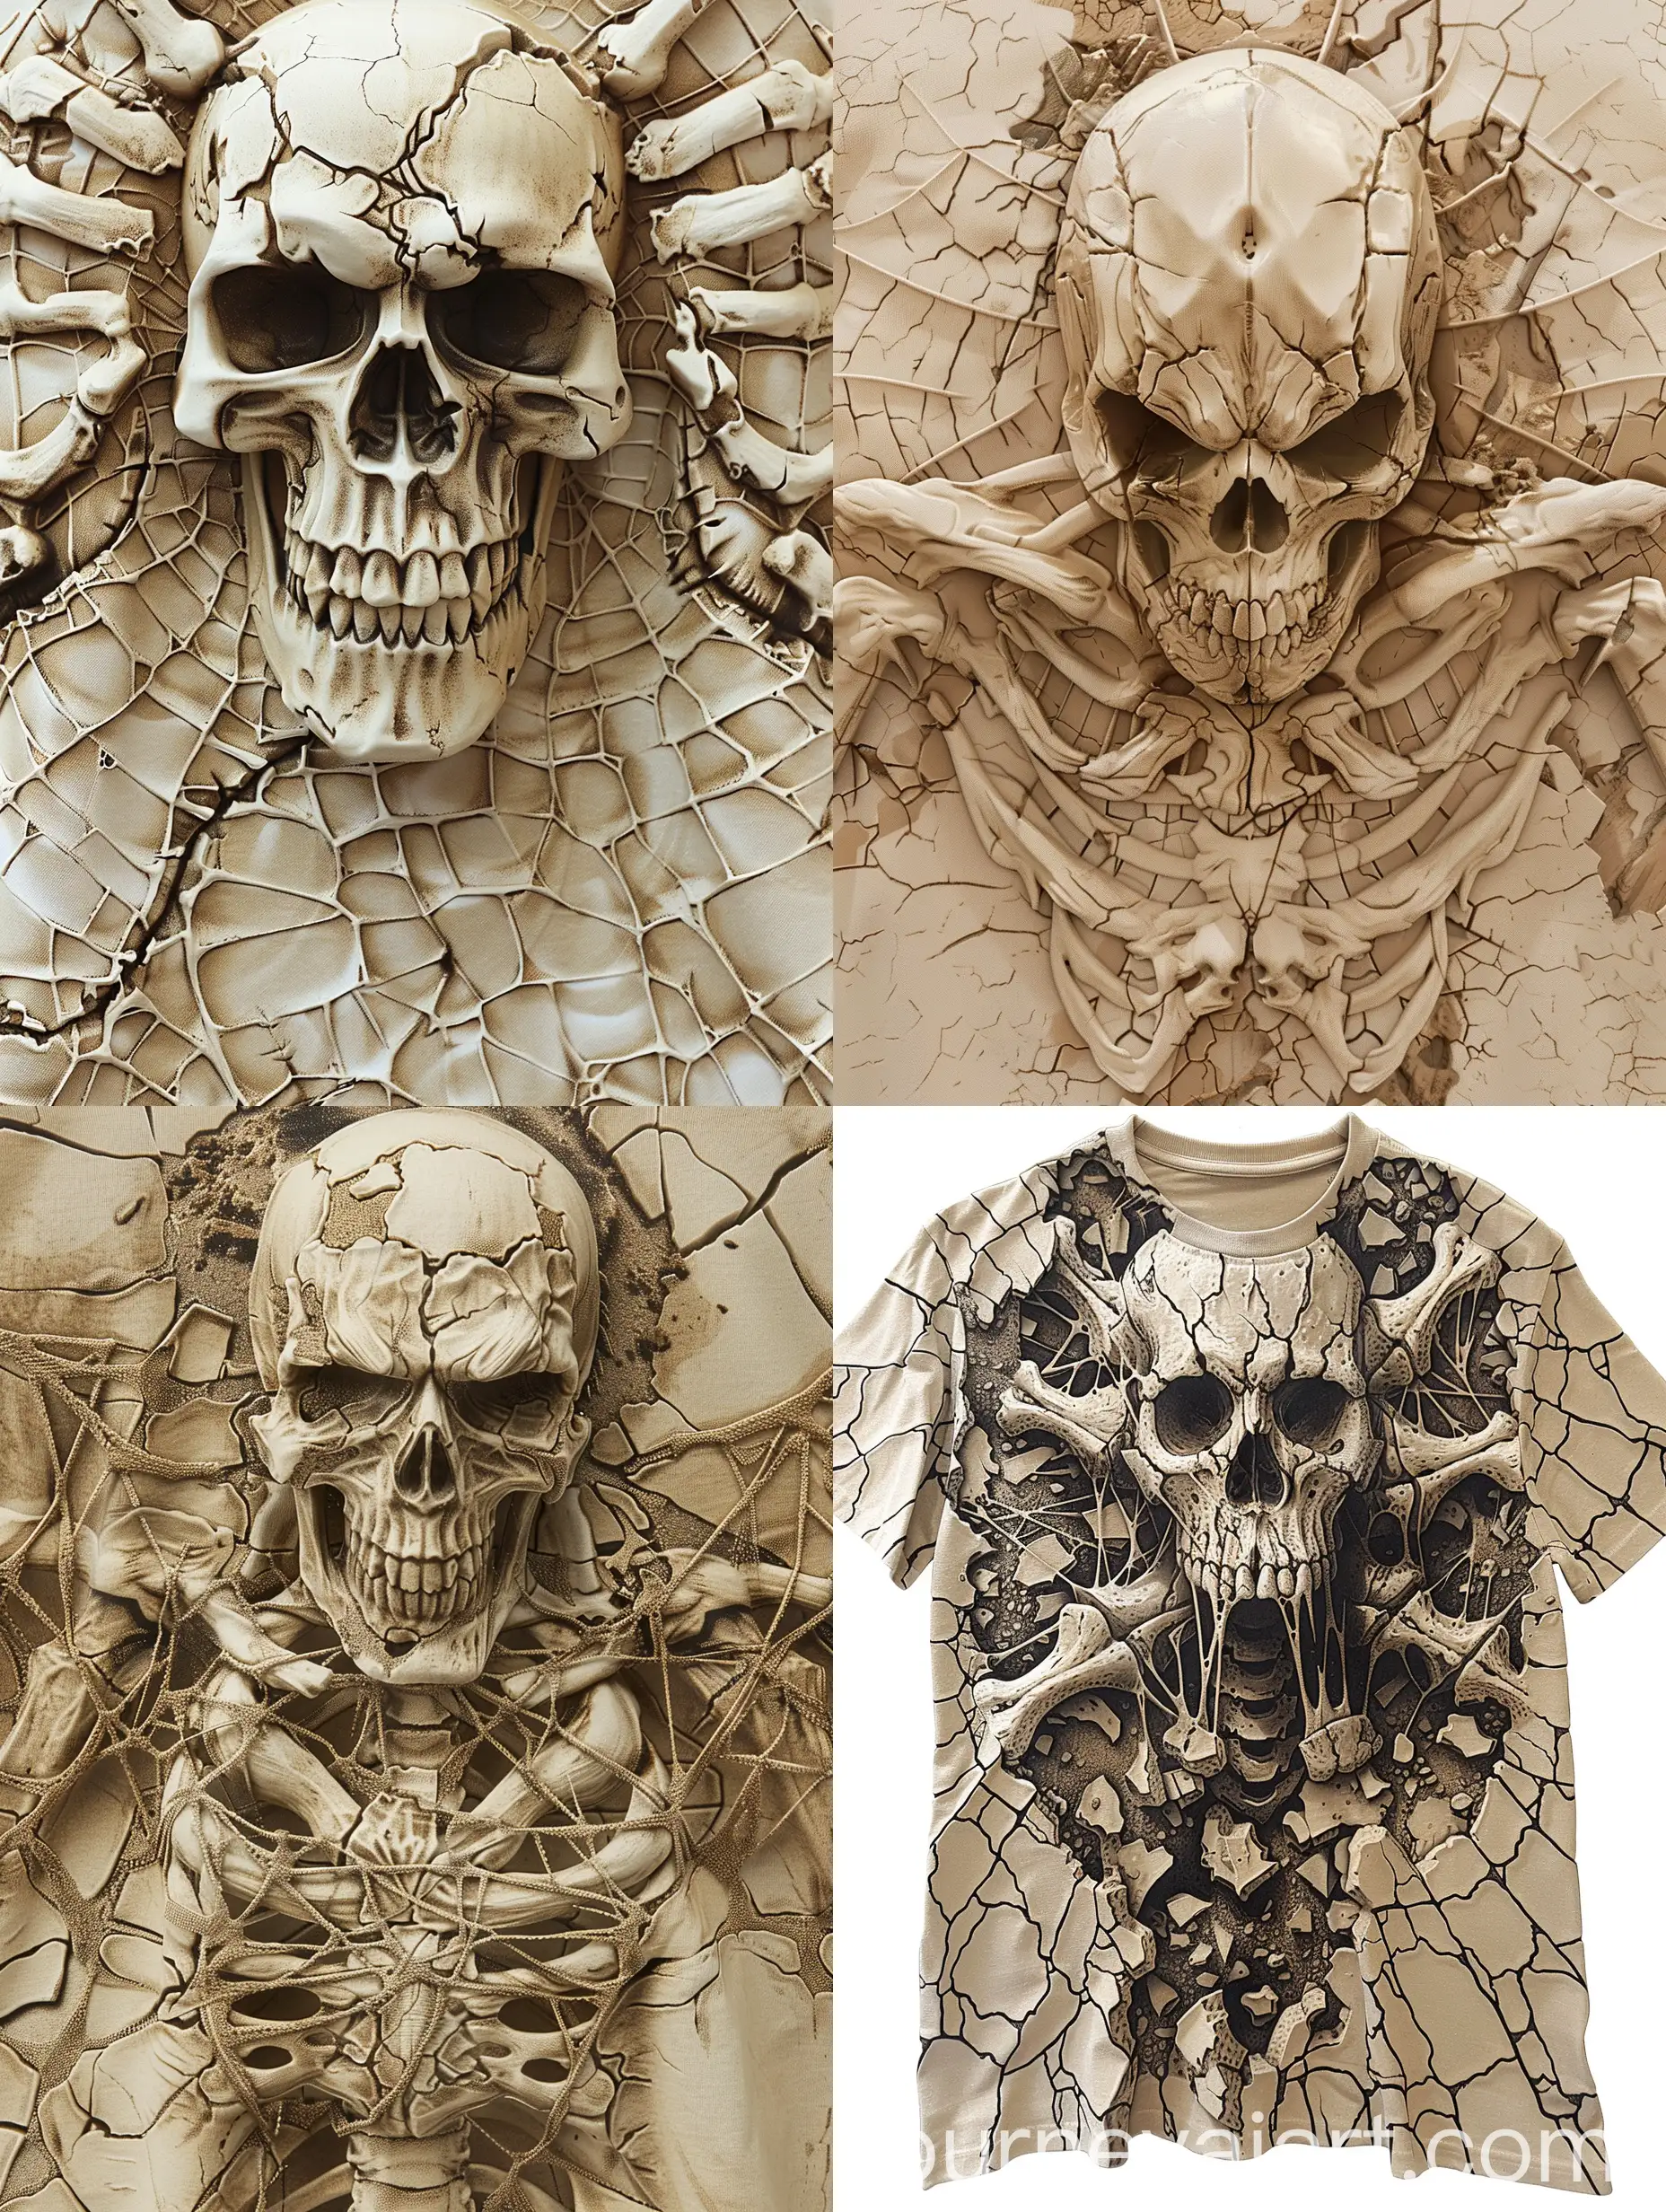 create  a three-dimensional, sculpted t-shirt with a highly detailed skeletal design. The centerpiece is a large, menacing skull on the upper chest area, surrounded by raised designs that resemble bones or an exoskeleton, creating a web-like or cracked earth pattern across the shirt. The monochromatic color scheme in shades of beige and brown enhances the realistic skeletal appearance, making the shirt resemble a piece of bone armor.